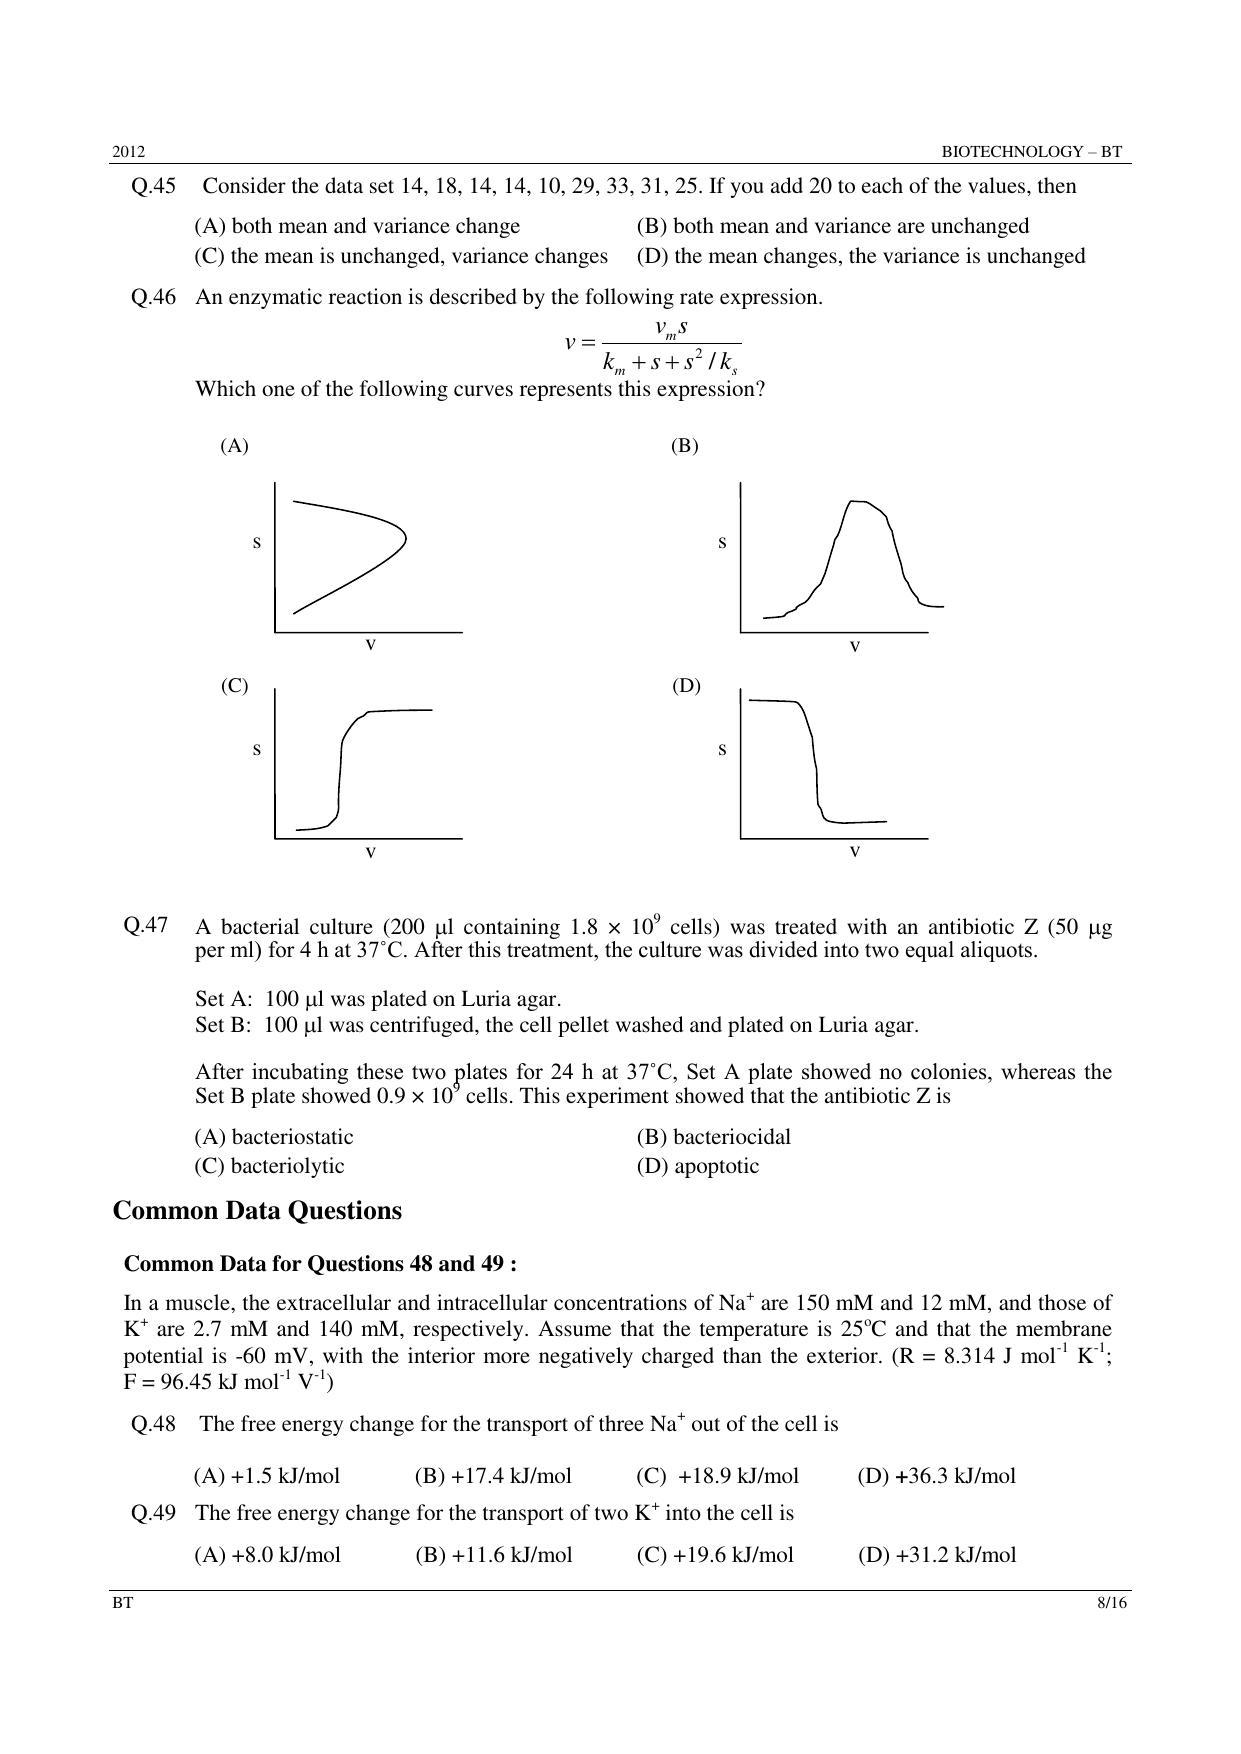 GATE 2012 Biotechnology (BT) Question Paper with Answer Key - Page 8